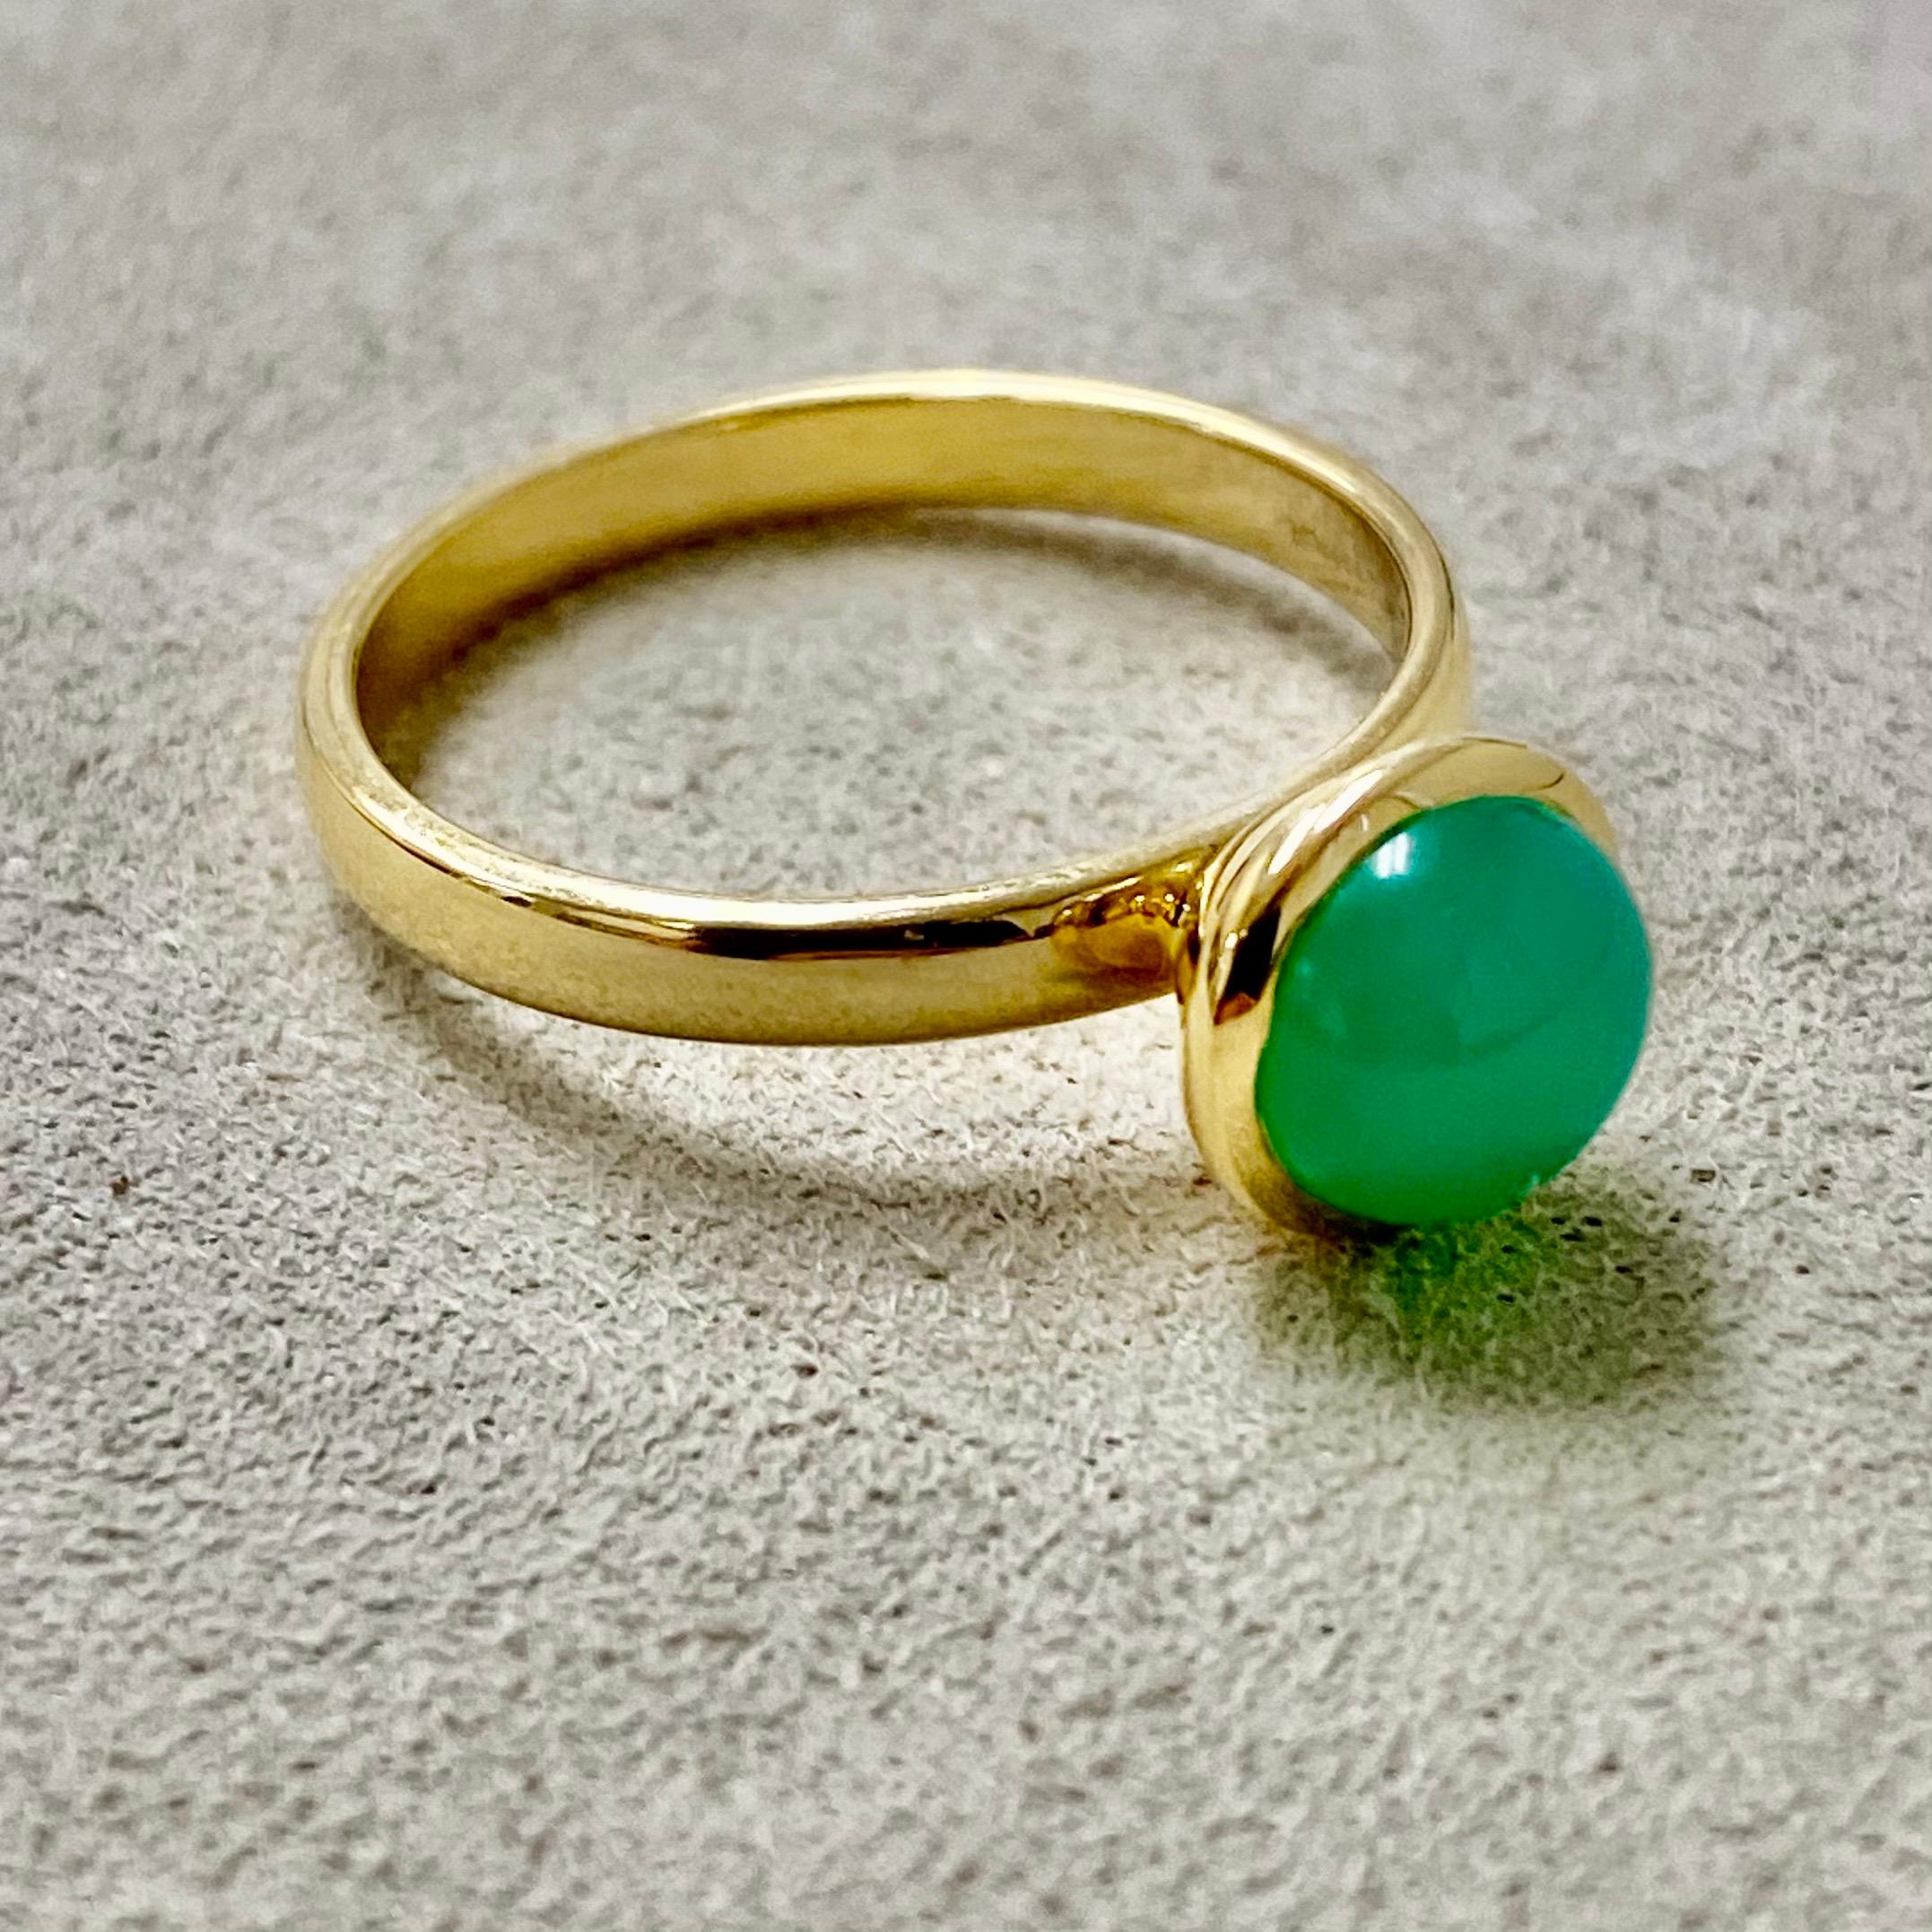 Created in 18 karat yellow gold
Chrysoprase 2 carats approx.
Ring size US 6.5, can be sized upon request.

Handcrafted from 18 karat yellow gold, this marvelous composition boasts a Chrysoprase center stone of around 2 carats. A Ring size US 6.5,